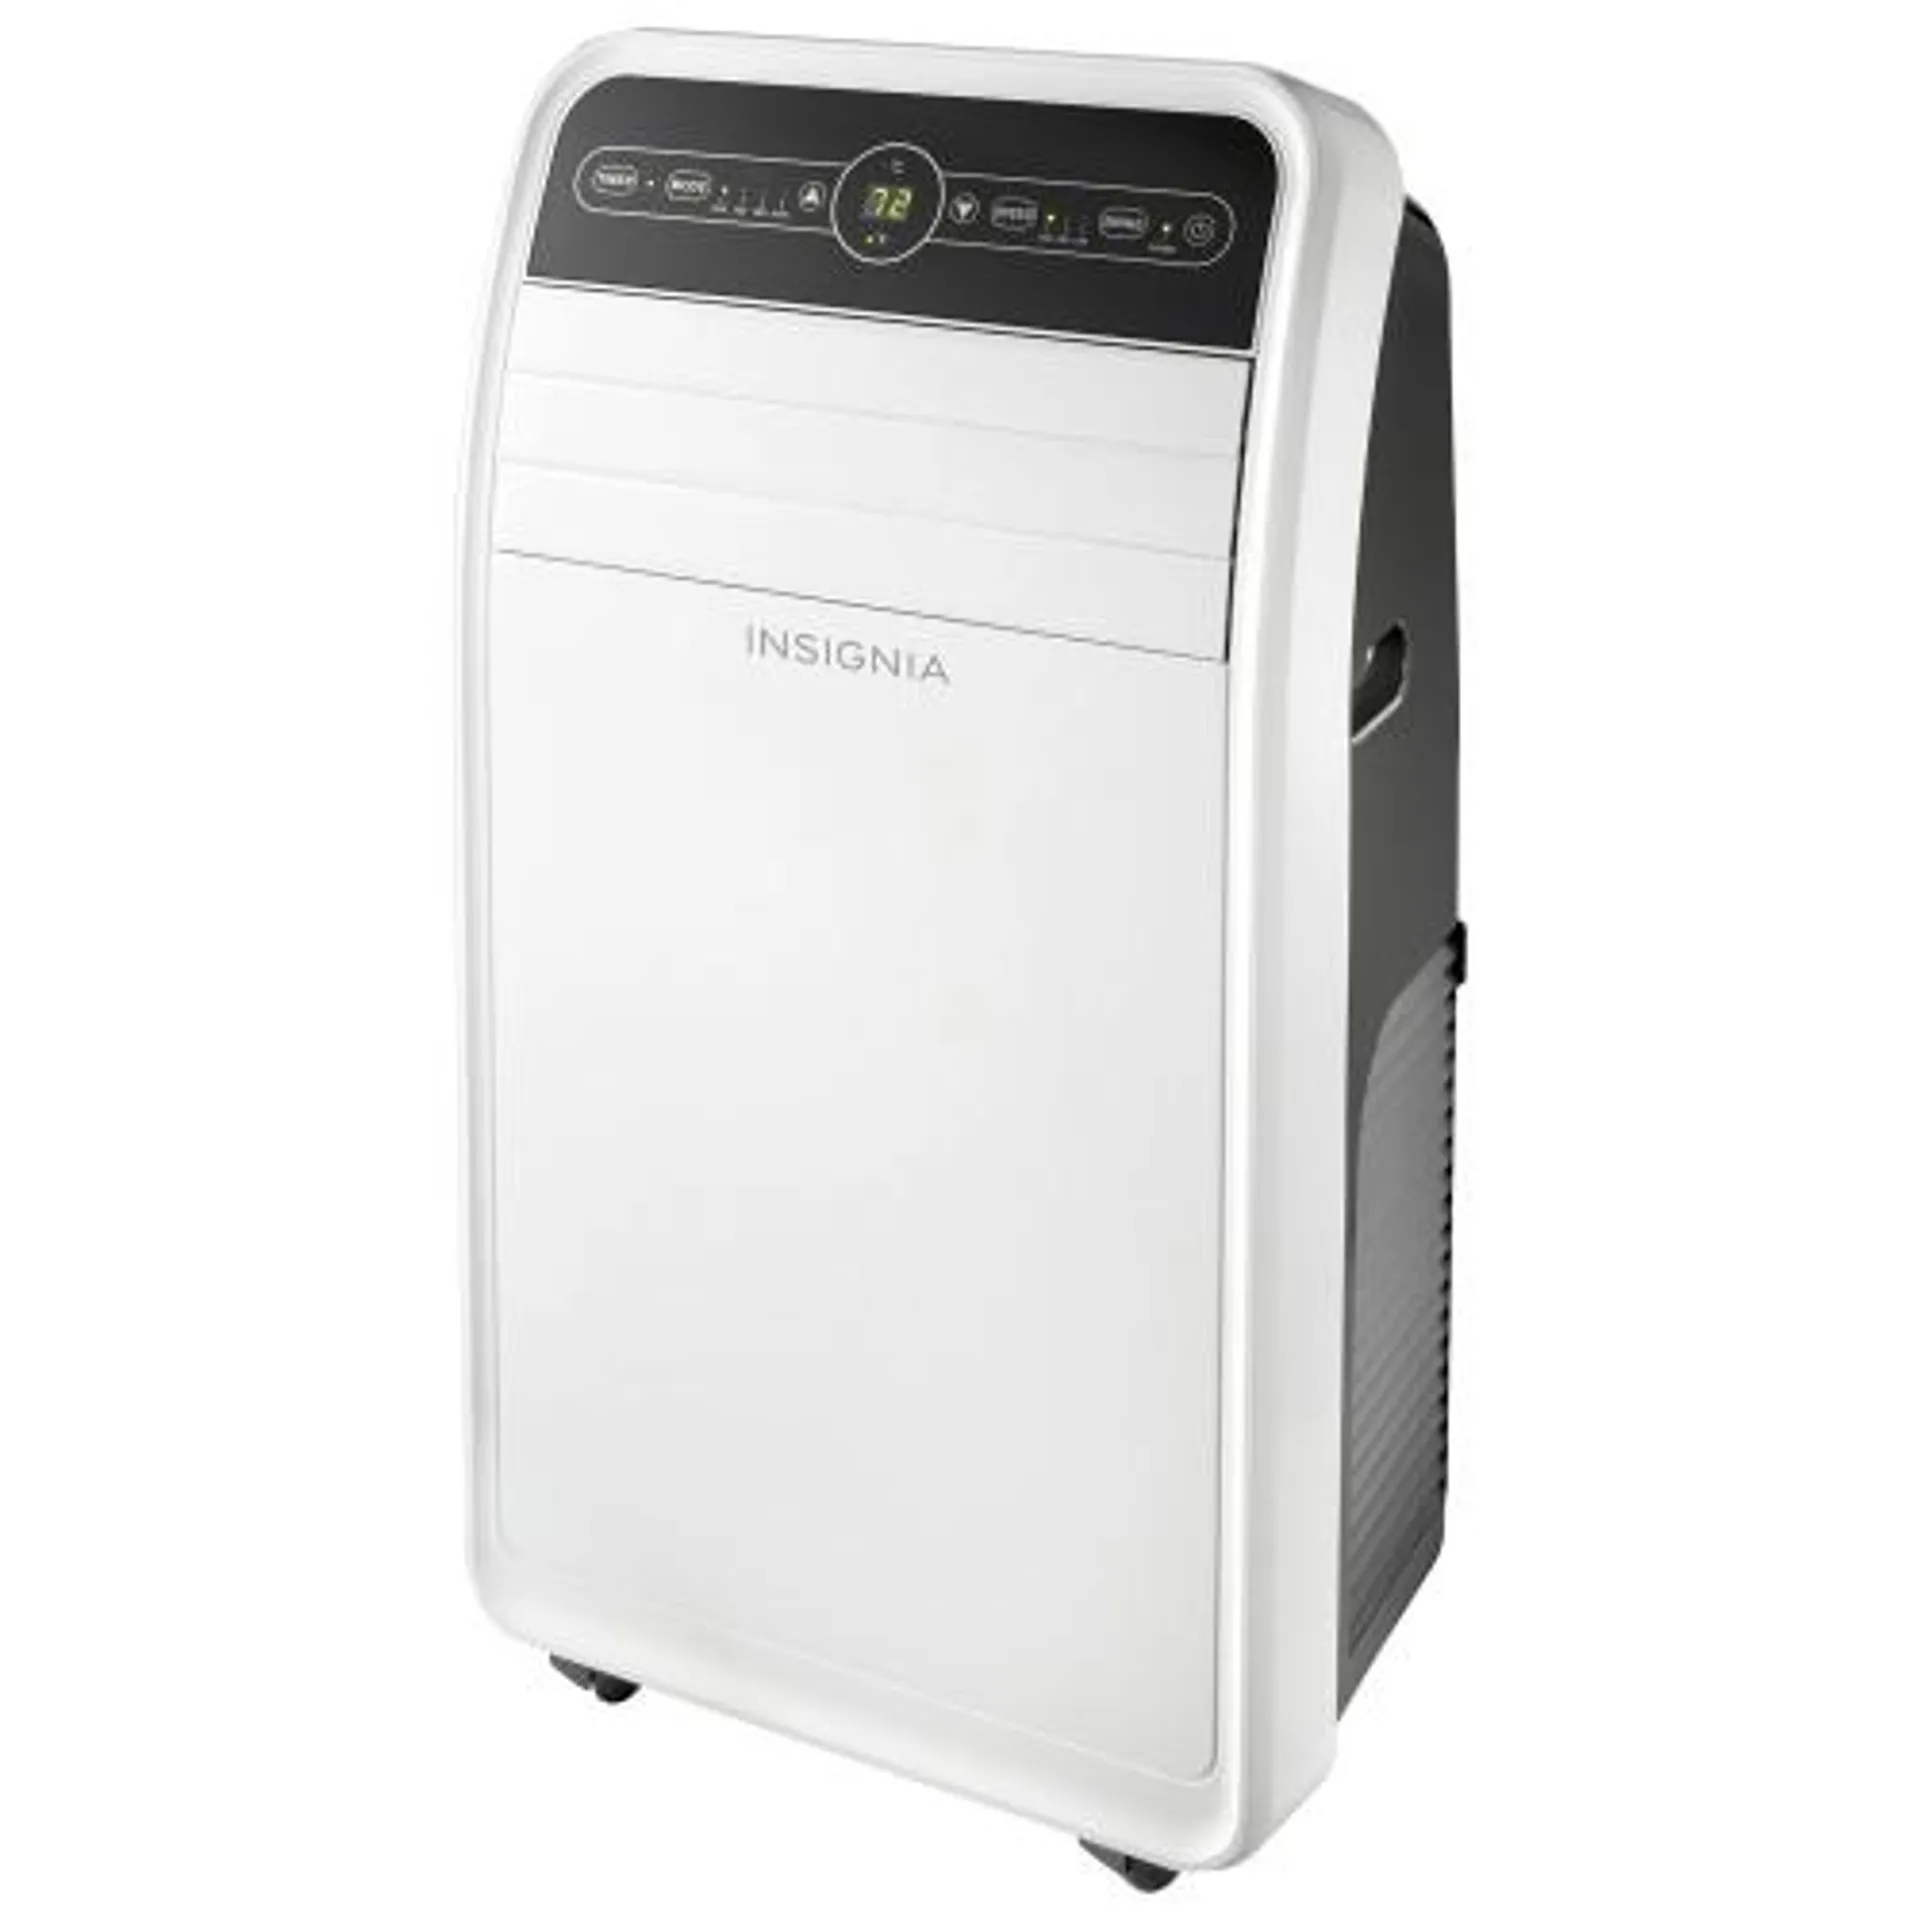 Insignia Portable Air Conditioner - 10000 BTU (SACC 6500 BTU) - White/Grey - Only at Best Buy